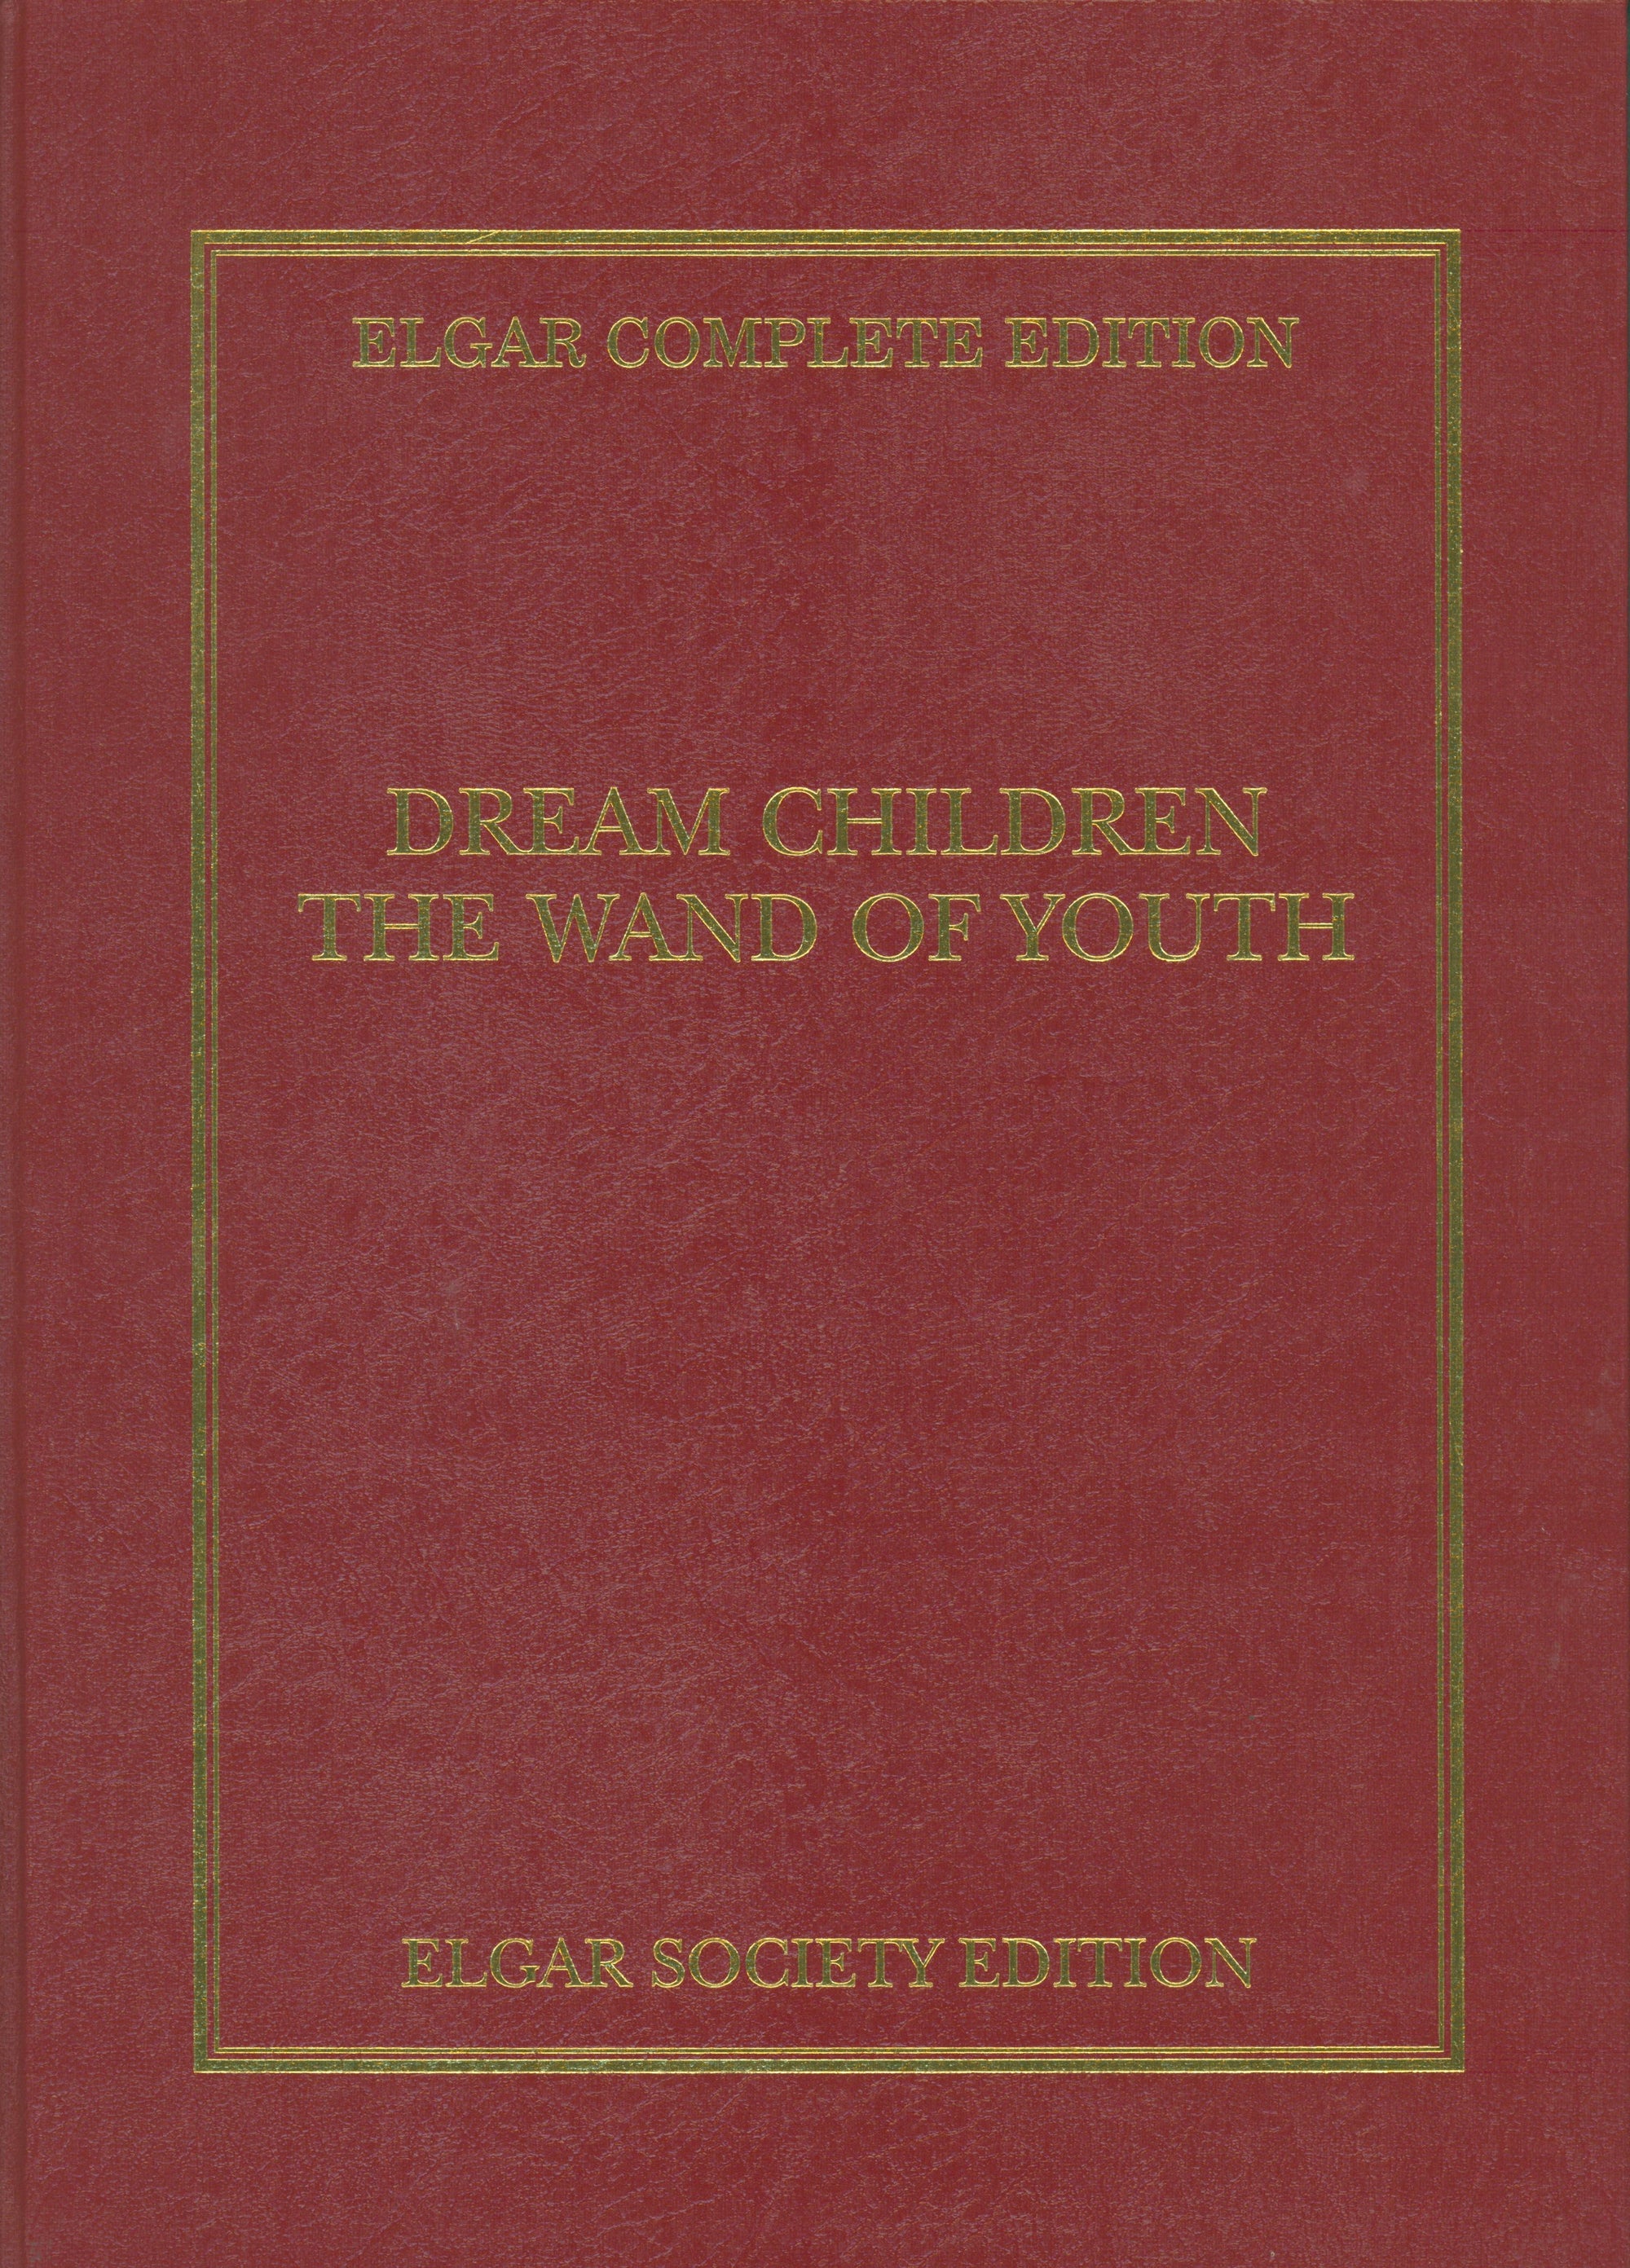 Elgar: Dream Children and The Wand of Youth